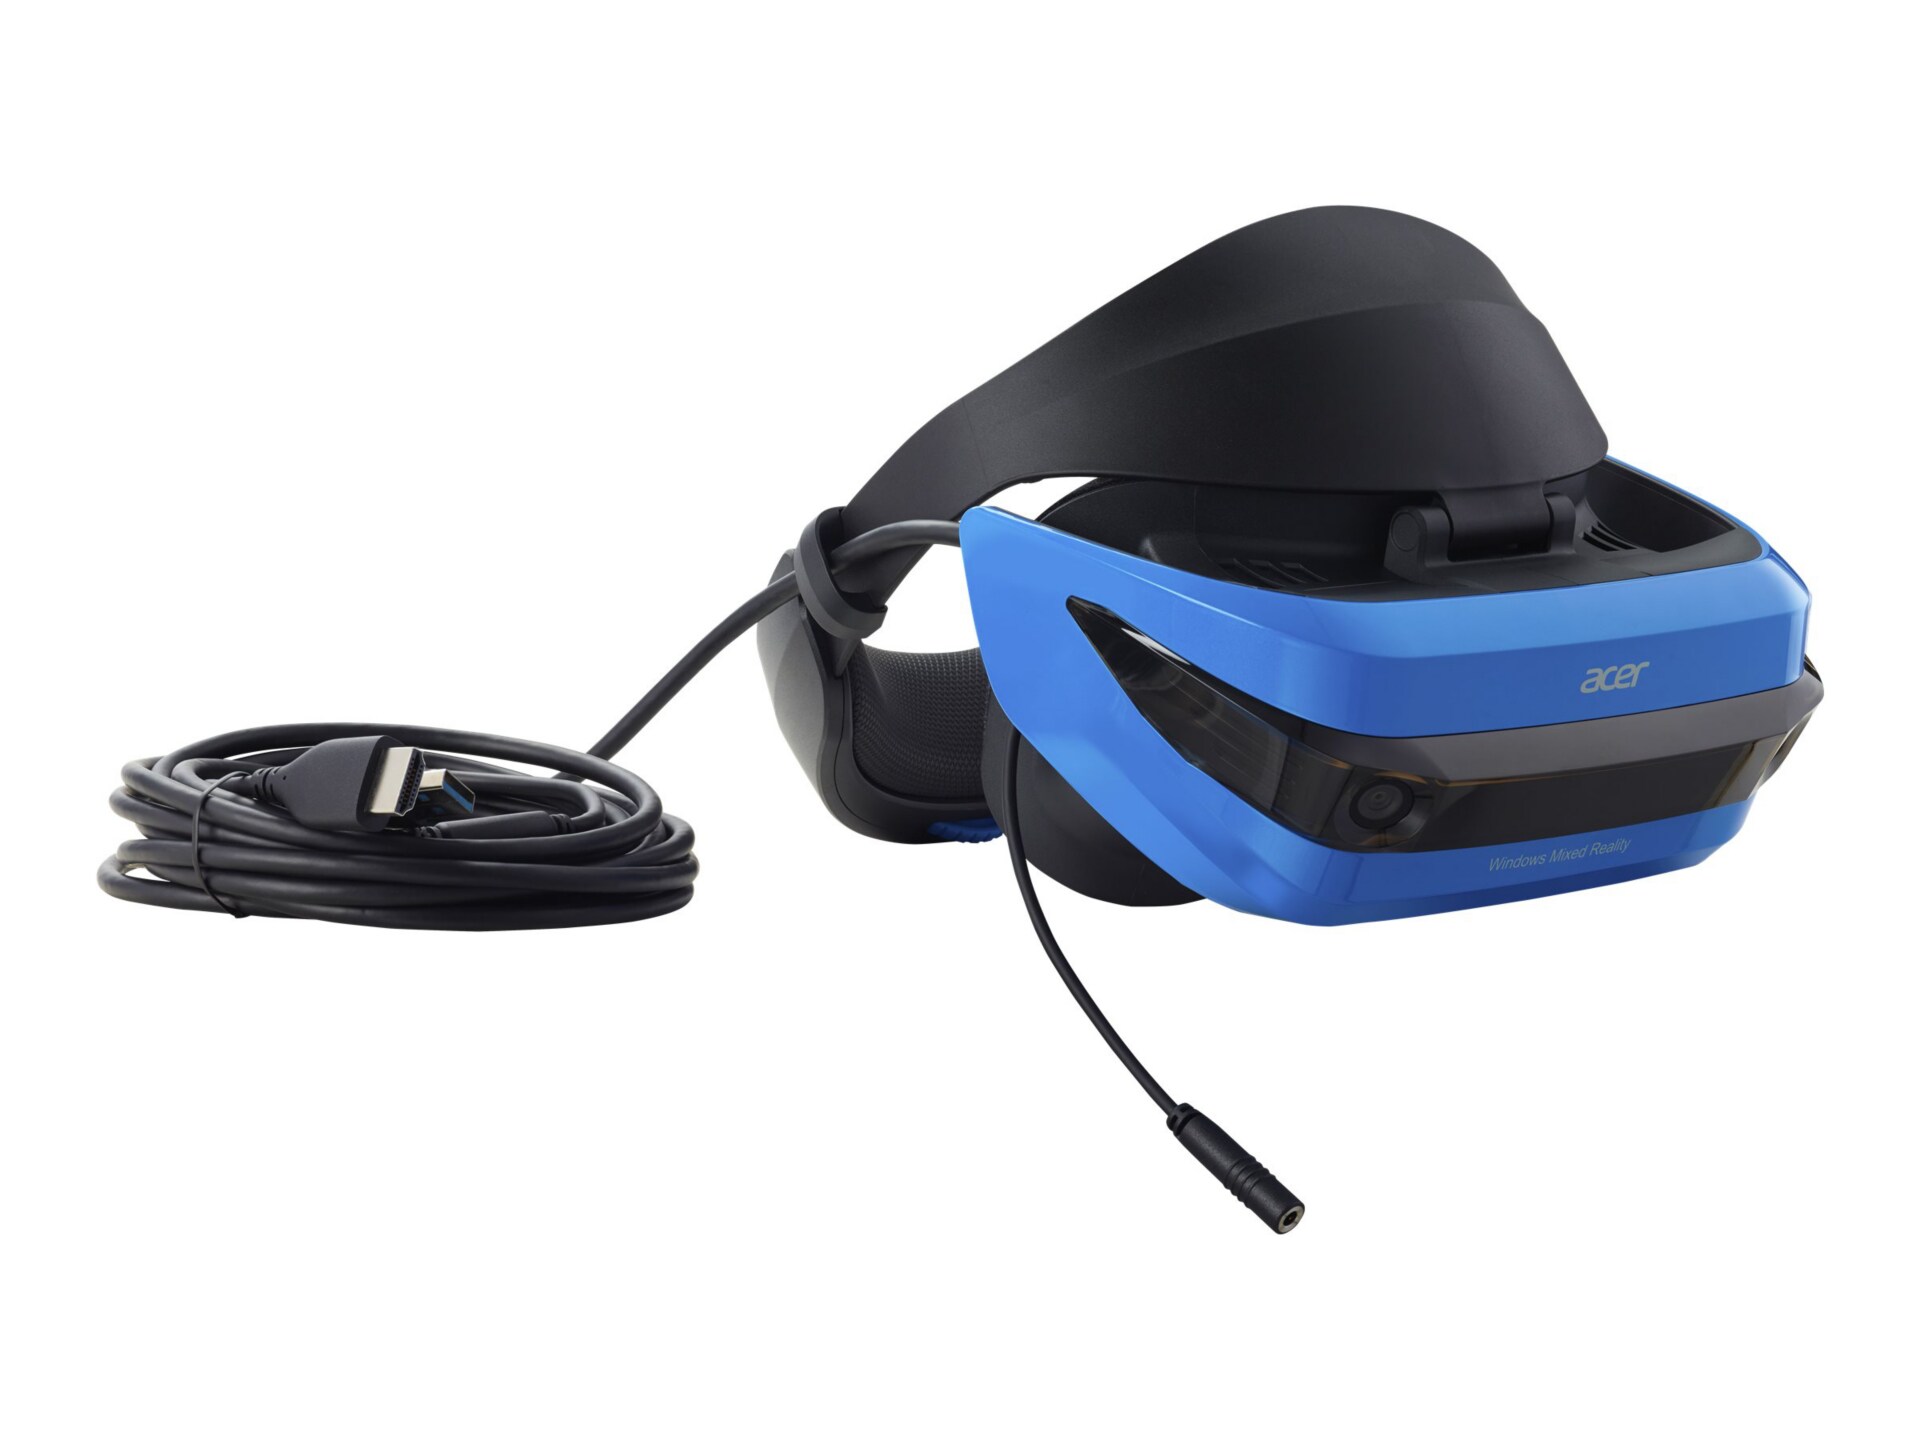 Acer Windows Mixed Reality Headset AH101-D8EY - virtual reality headset - 2.89"